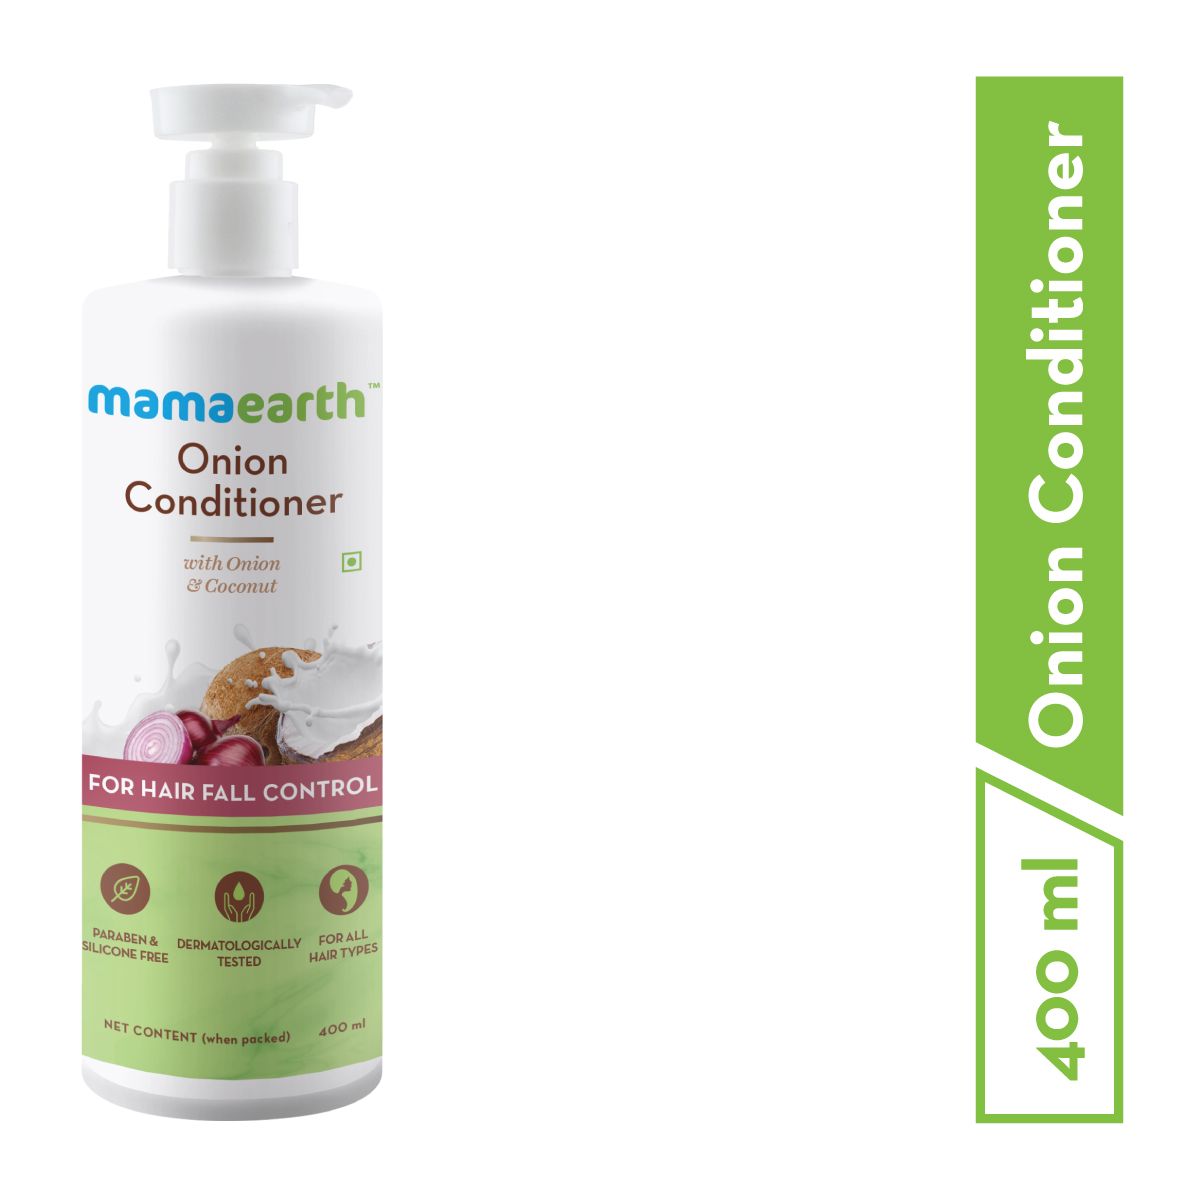 Mamaearth Onion Conditioner Better Than Any Other Conditioner in the market